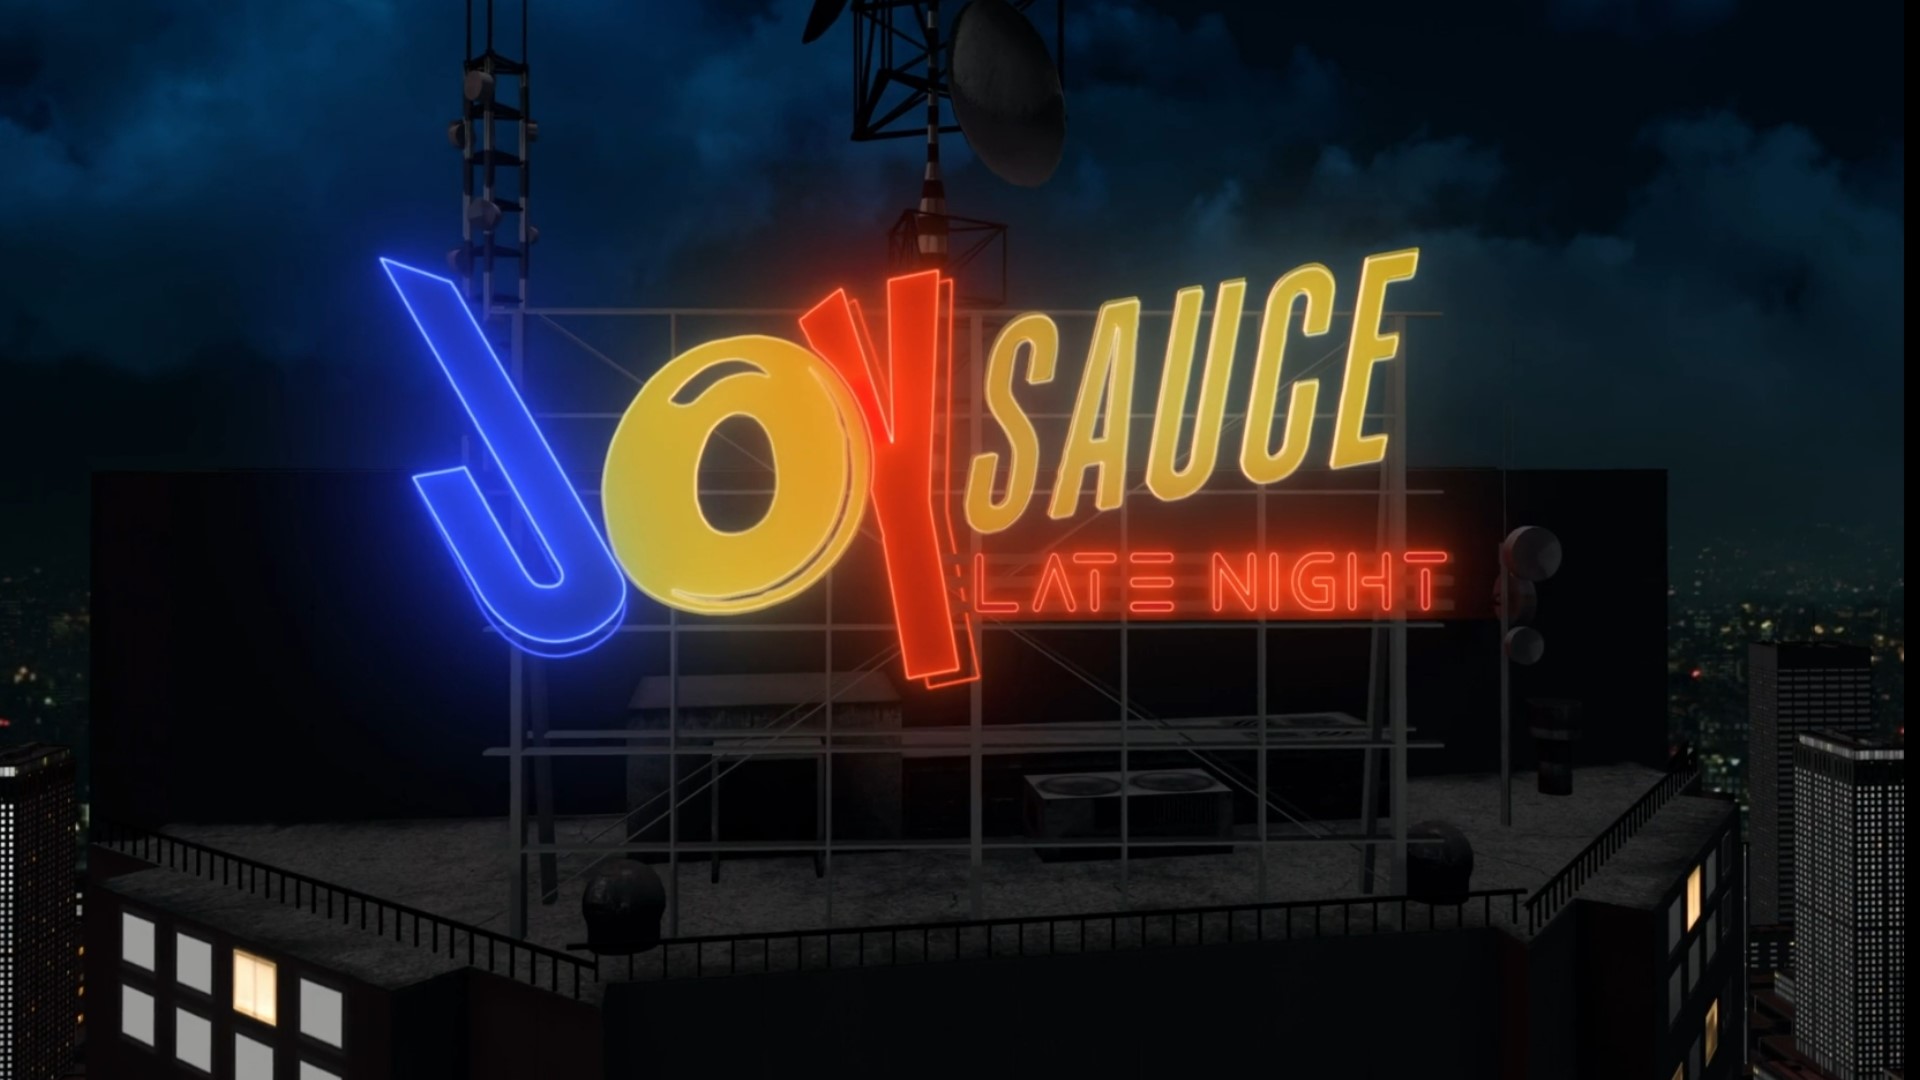 JoySauce Late Night, hosted by Jonathan Sposato, is part of a brand-new entertainment platform for American Asians. #k5evening